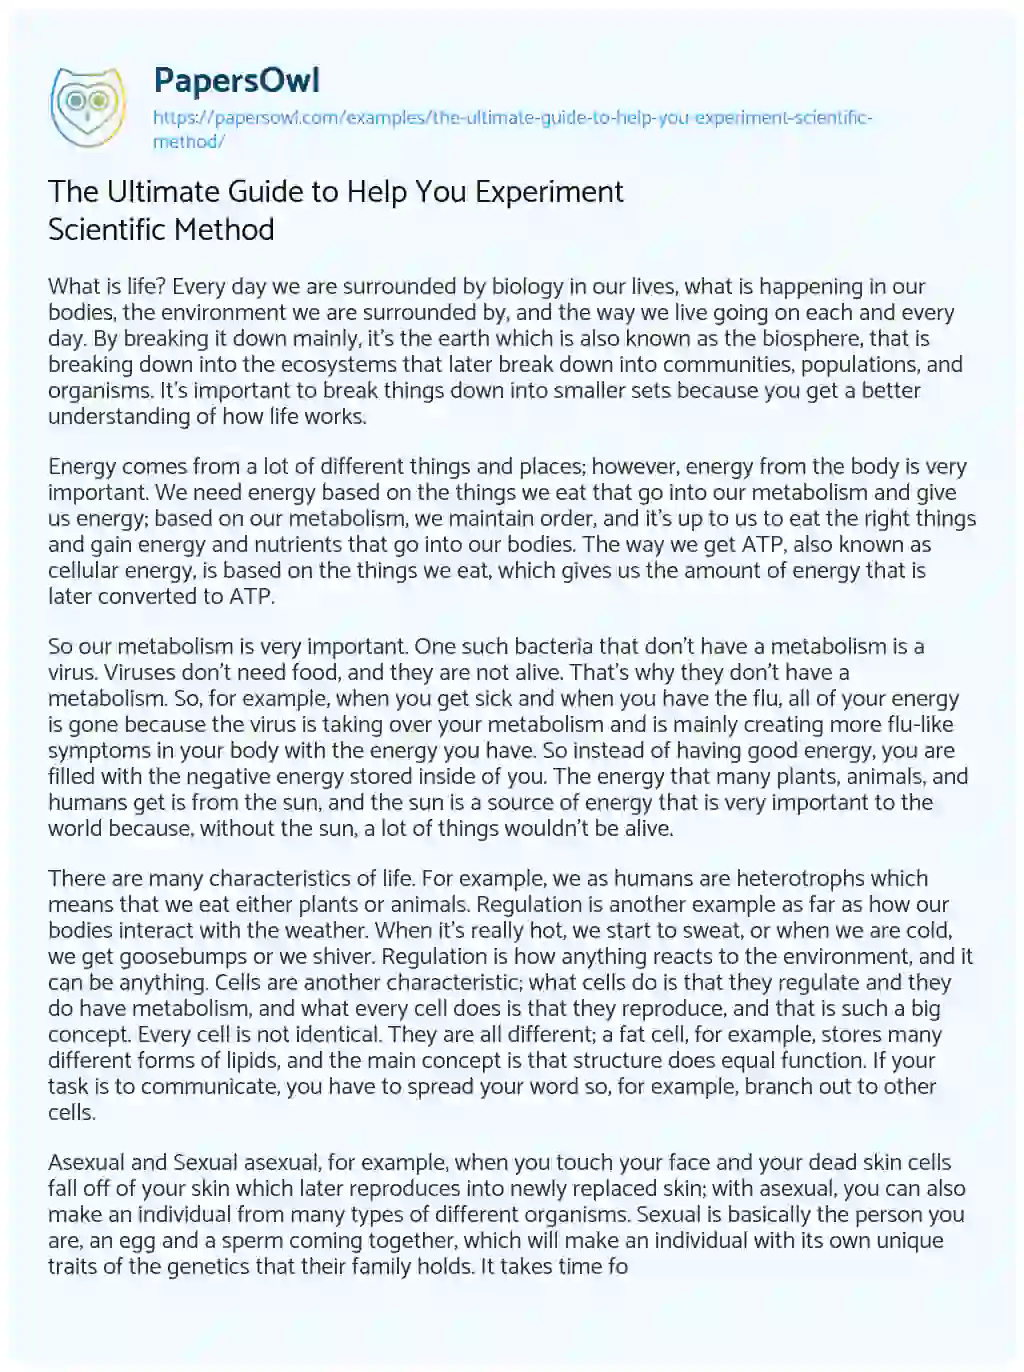 Essay on The Ultimate Guide to Help you Experiment Scientific Method